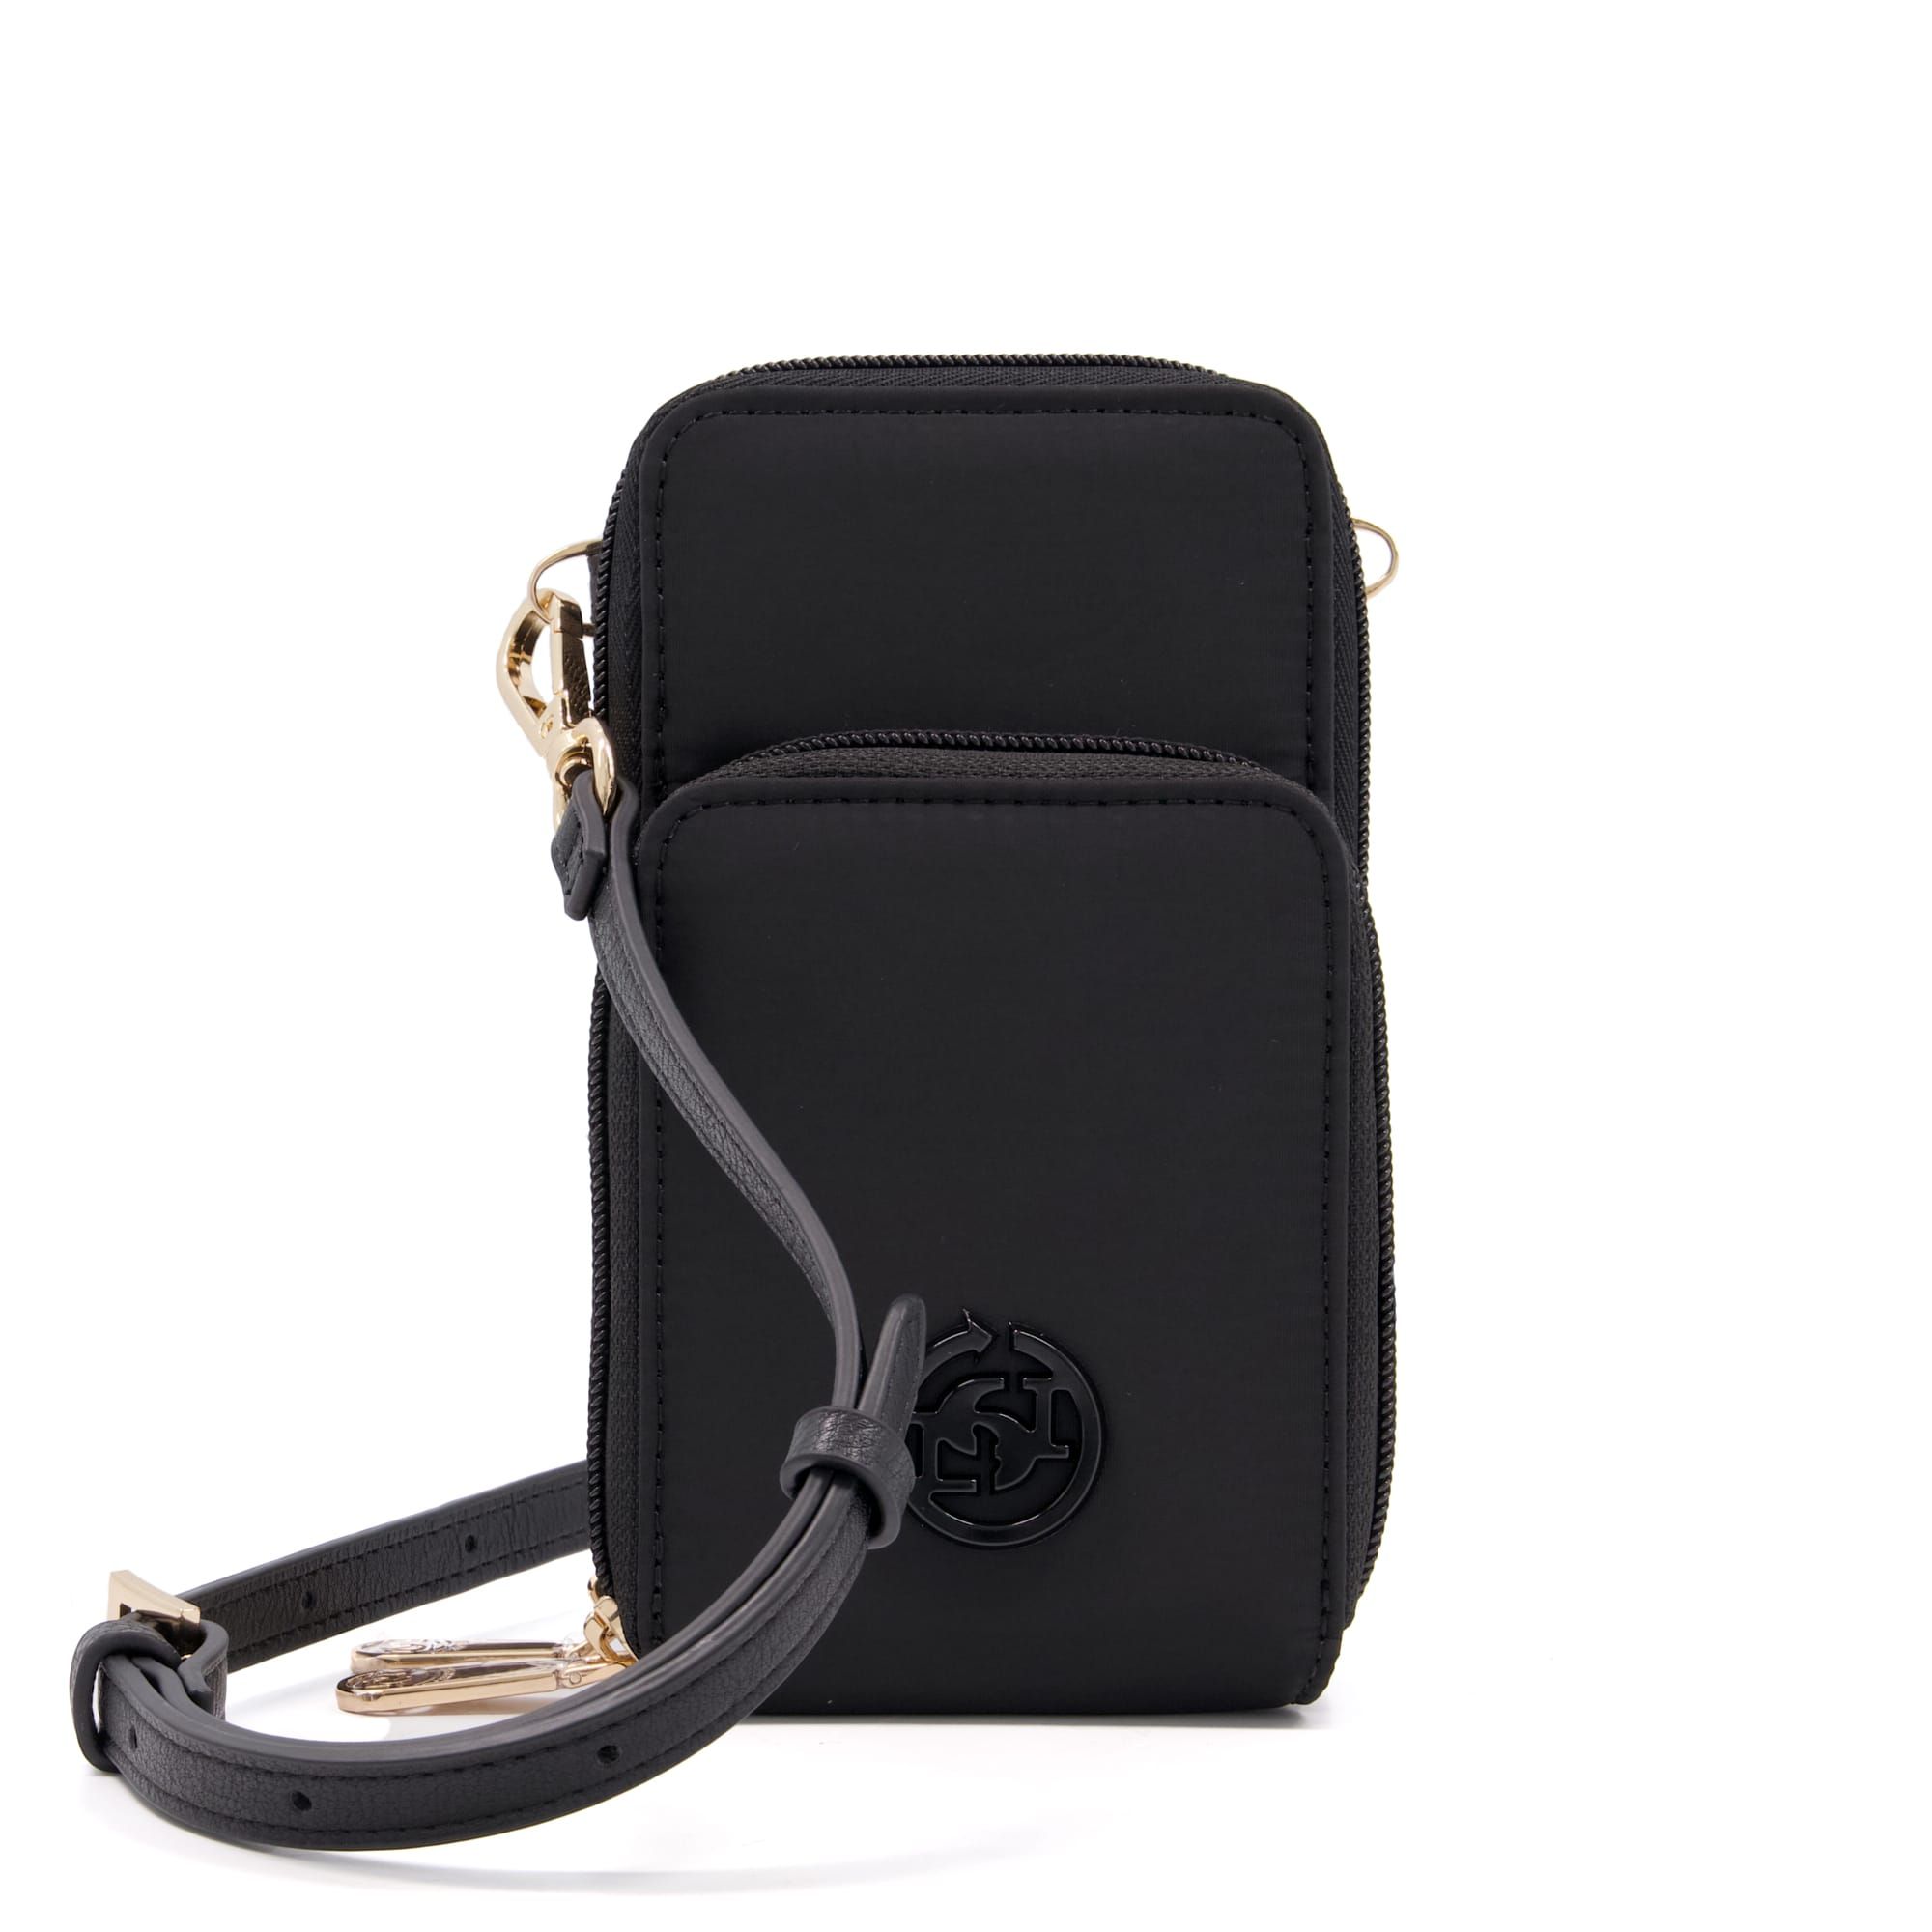 Keepsake combines style with practicality, allowing you to carry your phone, cards and change hands-free. This soft-shell piece is made with recycled polyester and has a long strap to be worn around your neck. Just want Keepsake for your handbag?